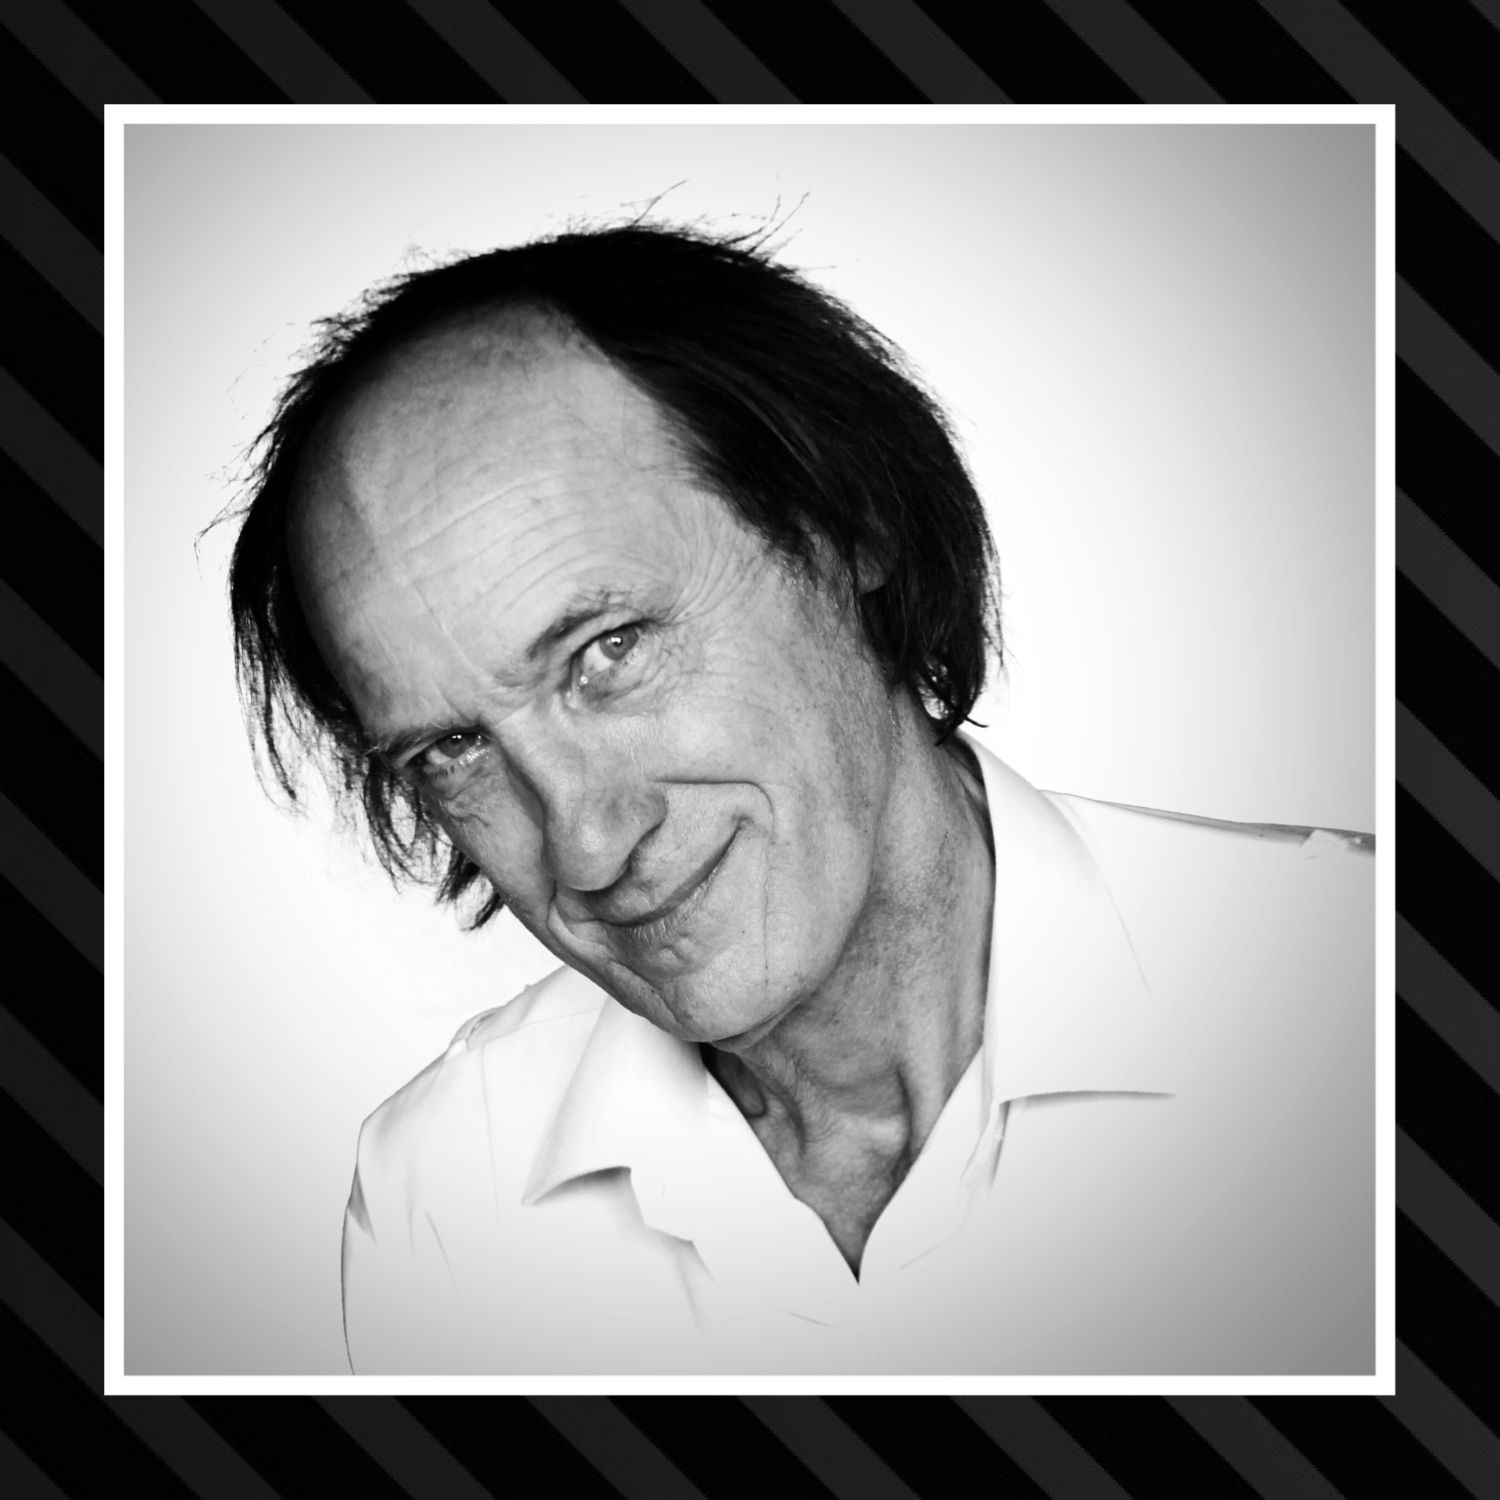 42: The one with John Otway Image